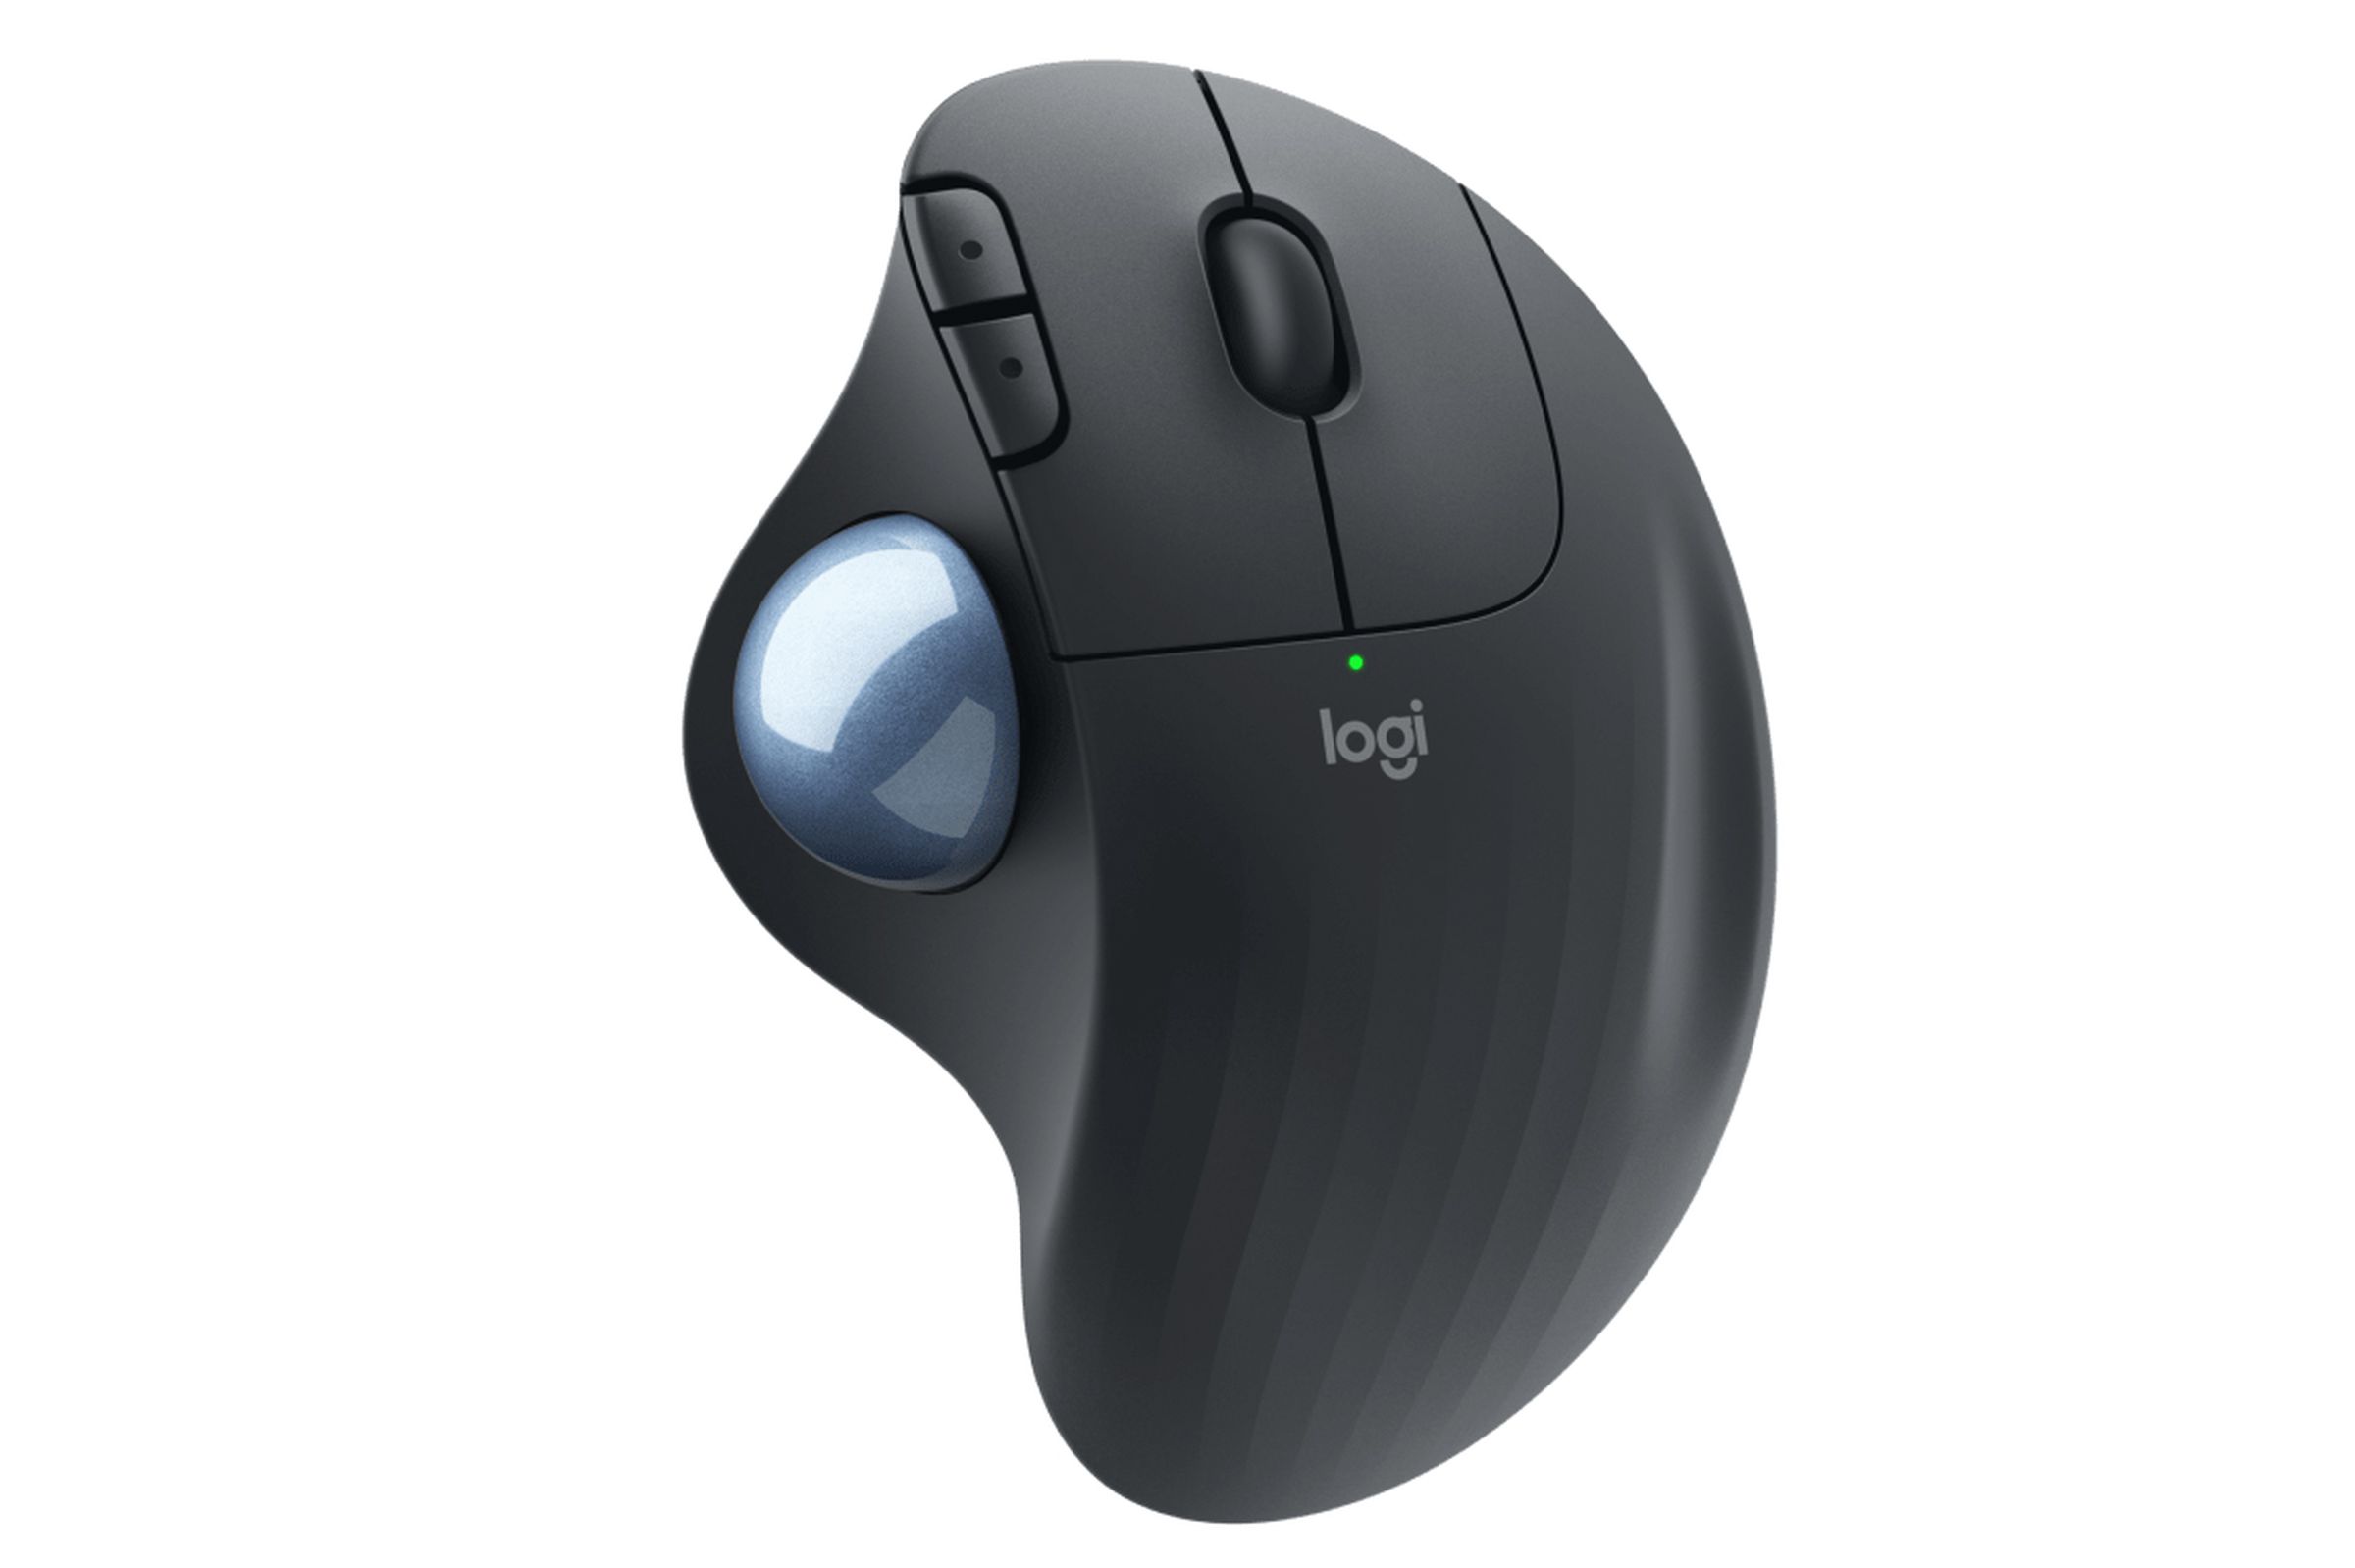 There are two programmable buttons on the left of the mouse.